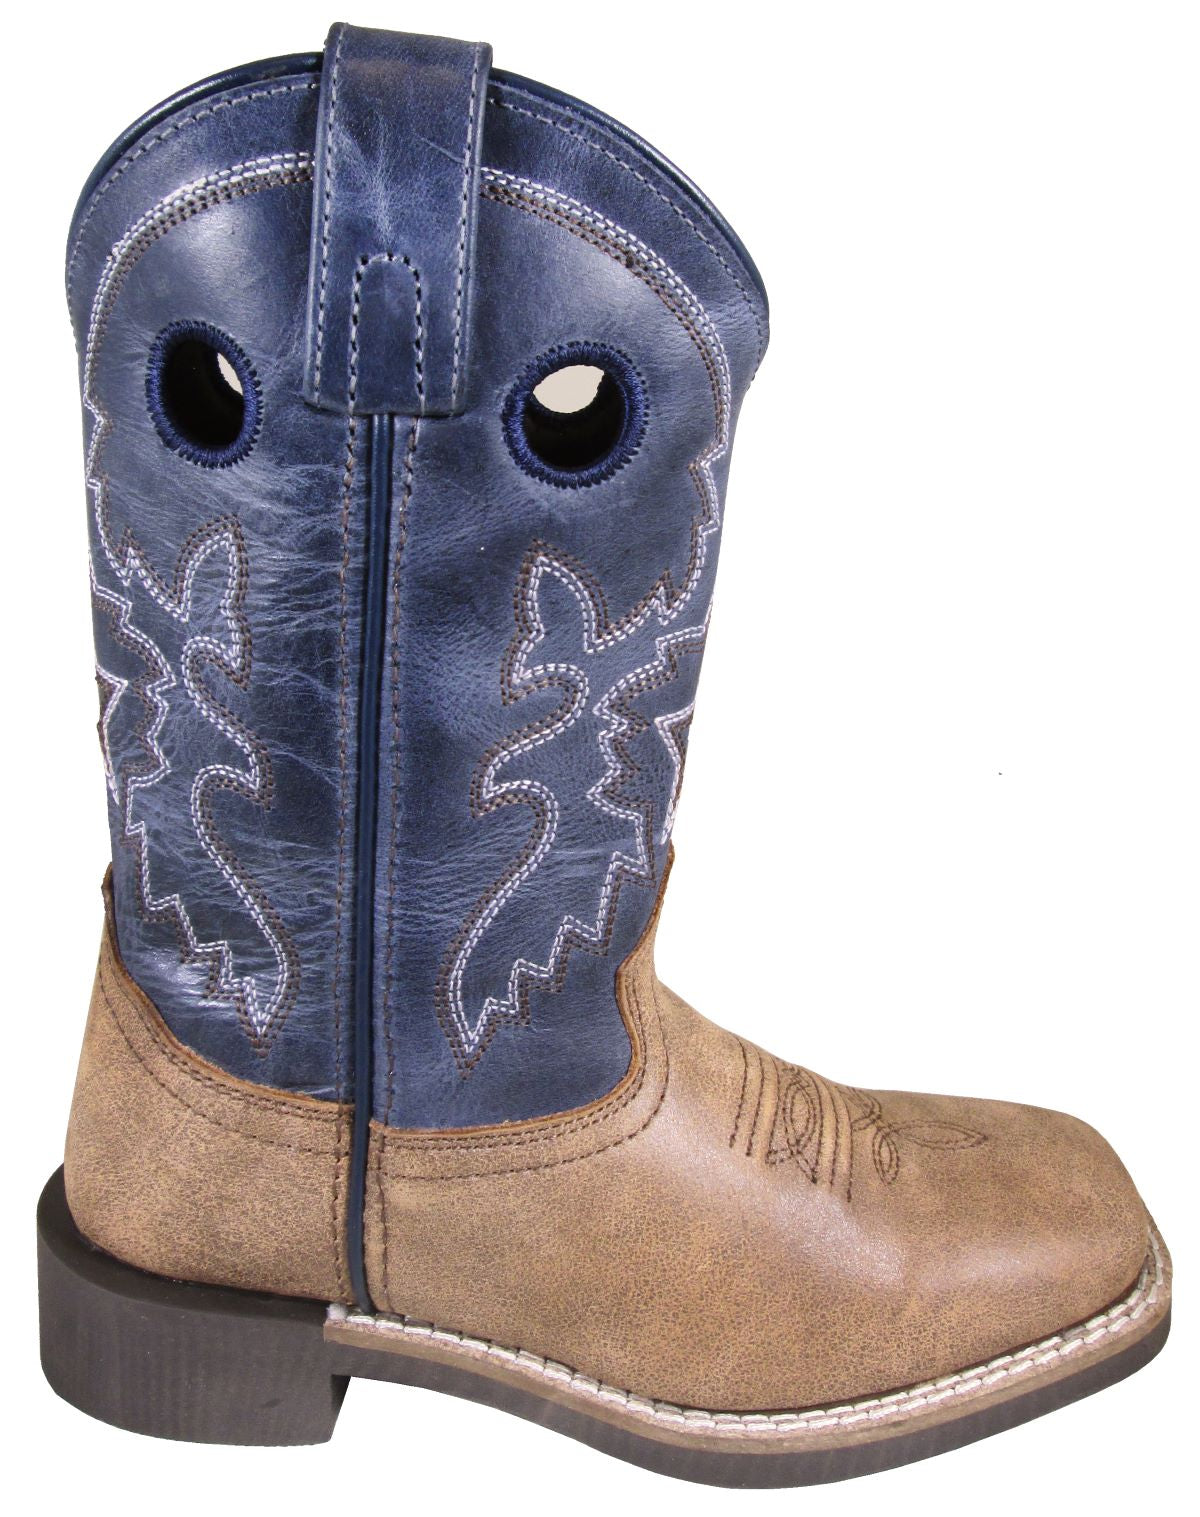 'Smoky Mountain' Youth Canyon Western Square Toe - Vintage Brown / Vintage Blue